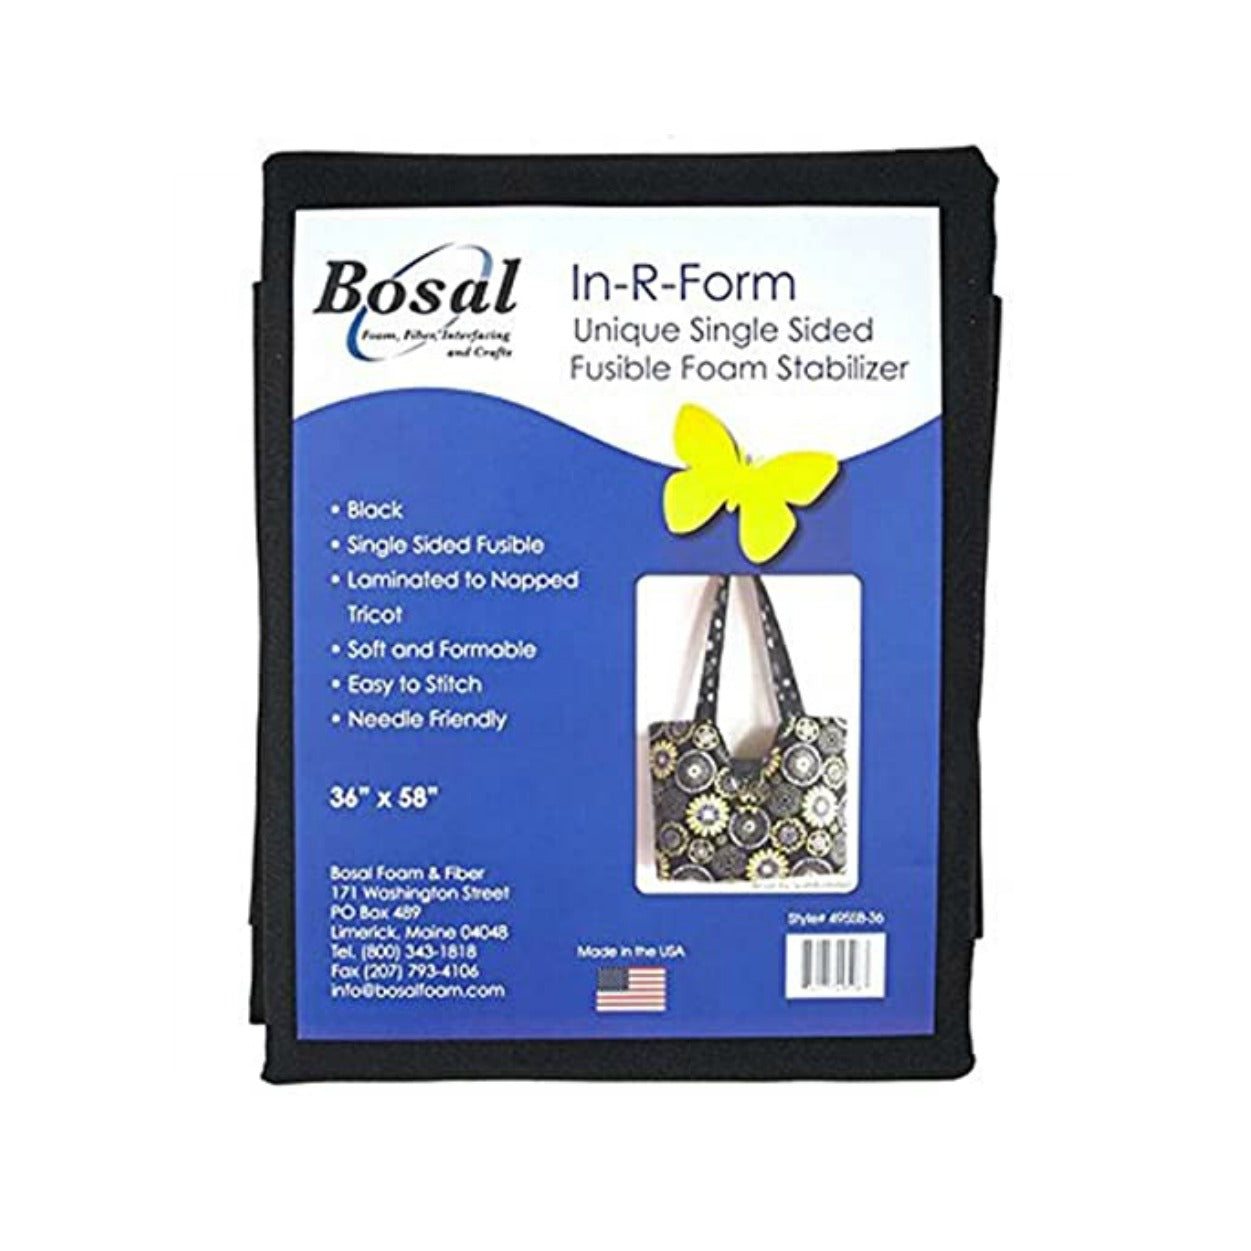 Bosal In-R-Form Single-Sided Fusible 36" by 58" Black